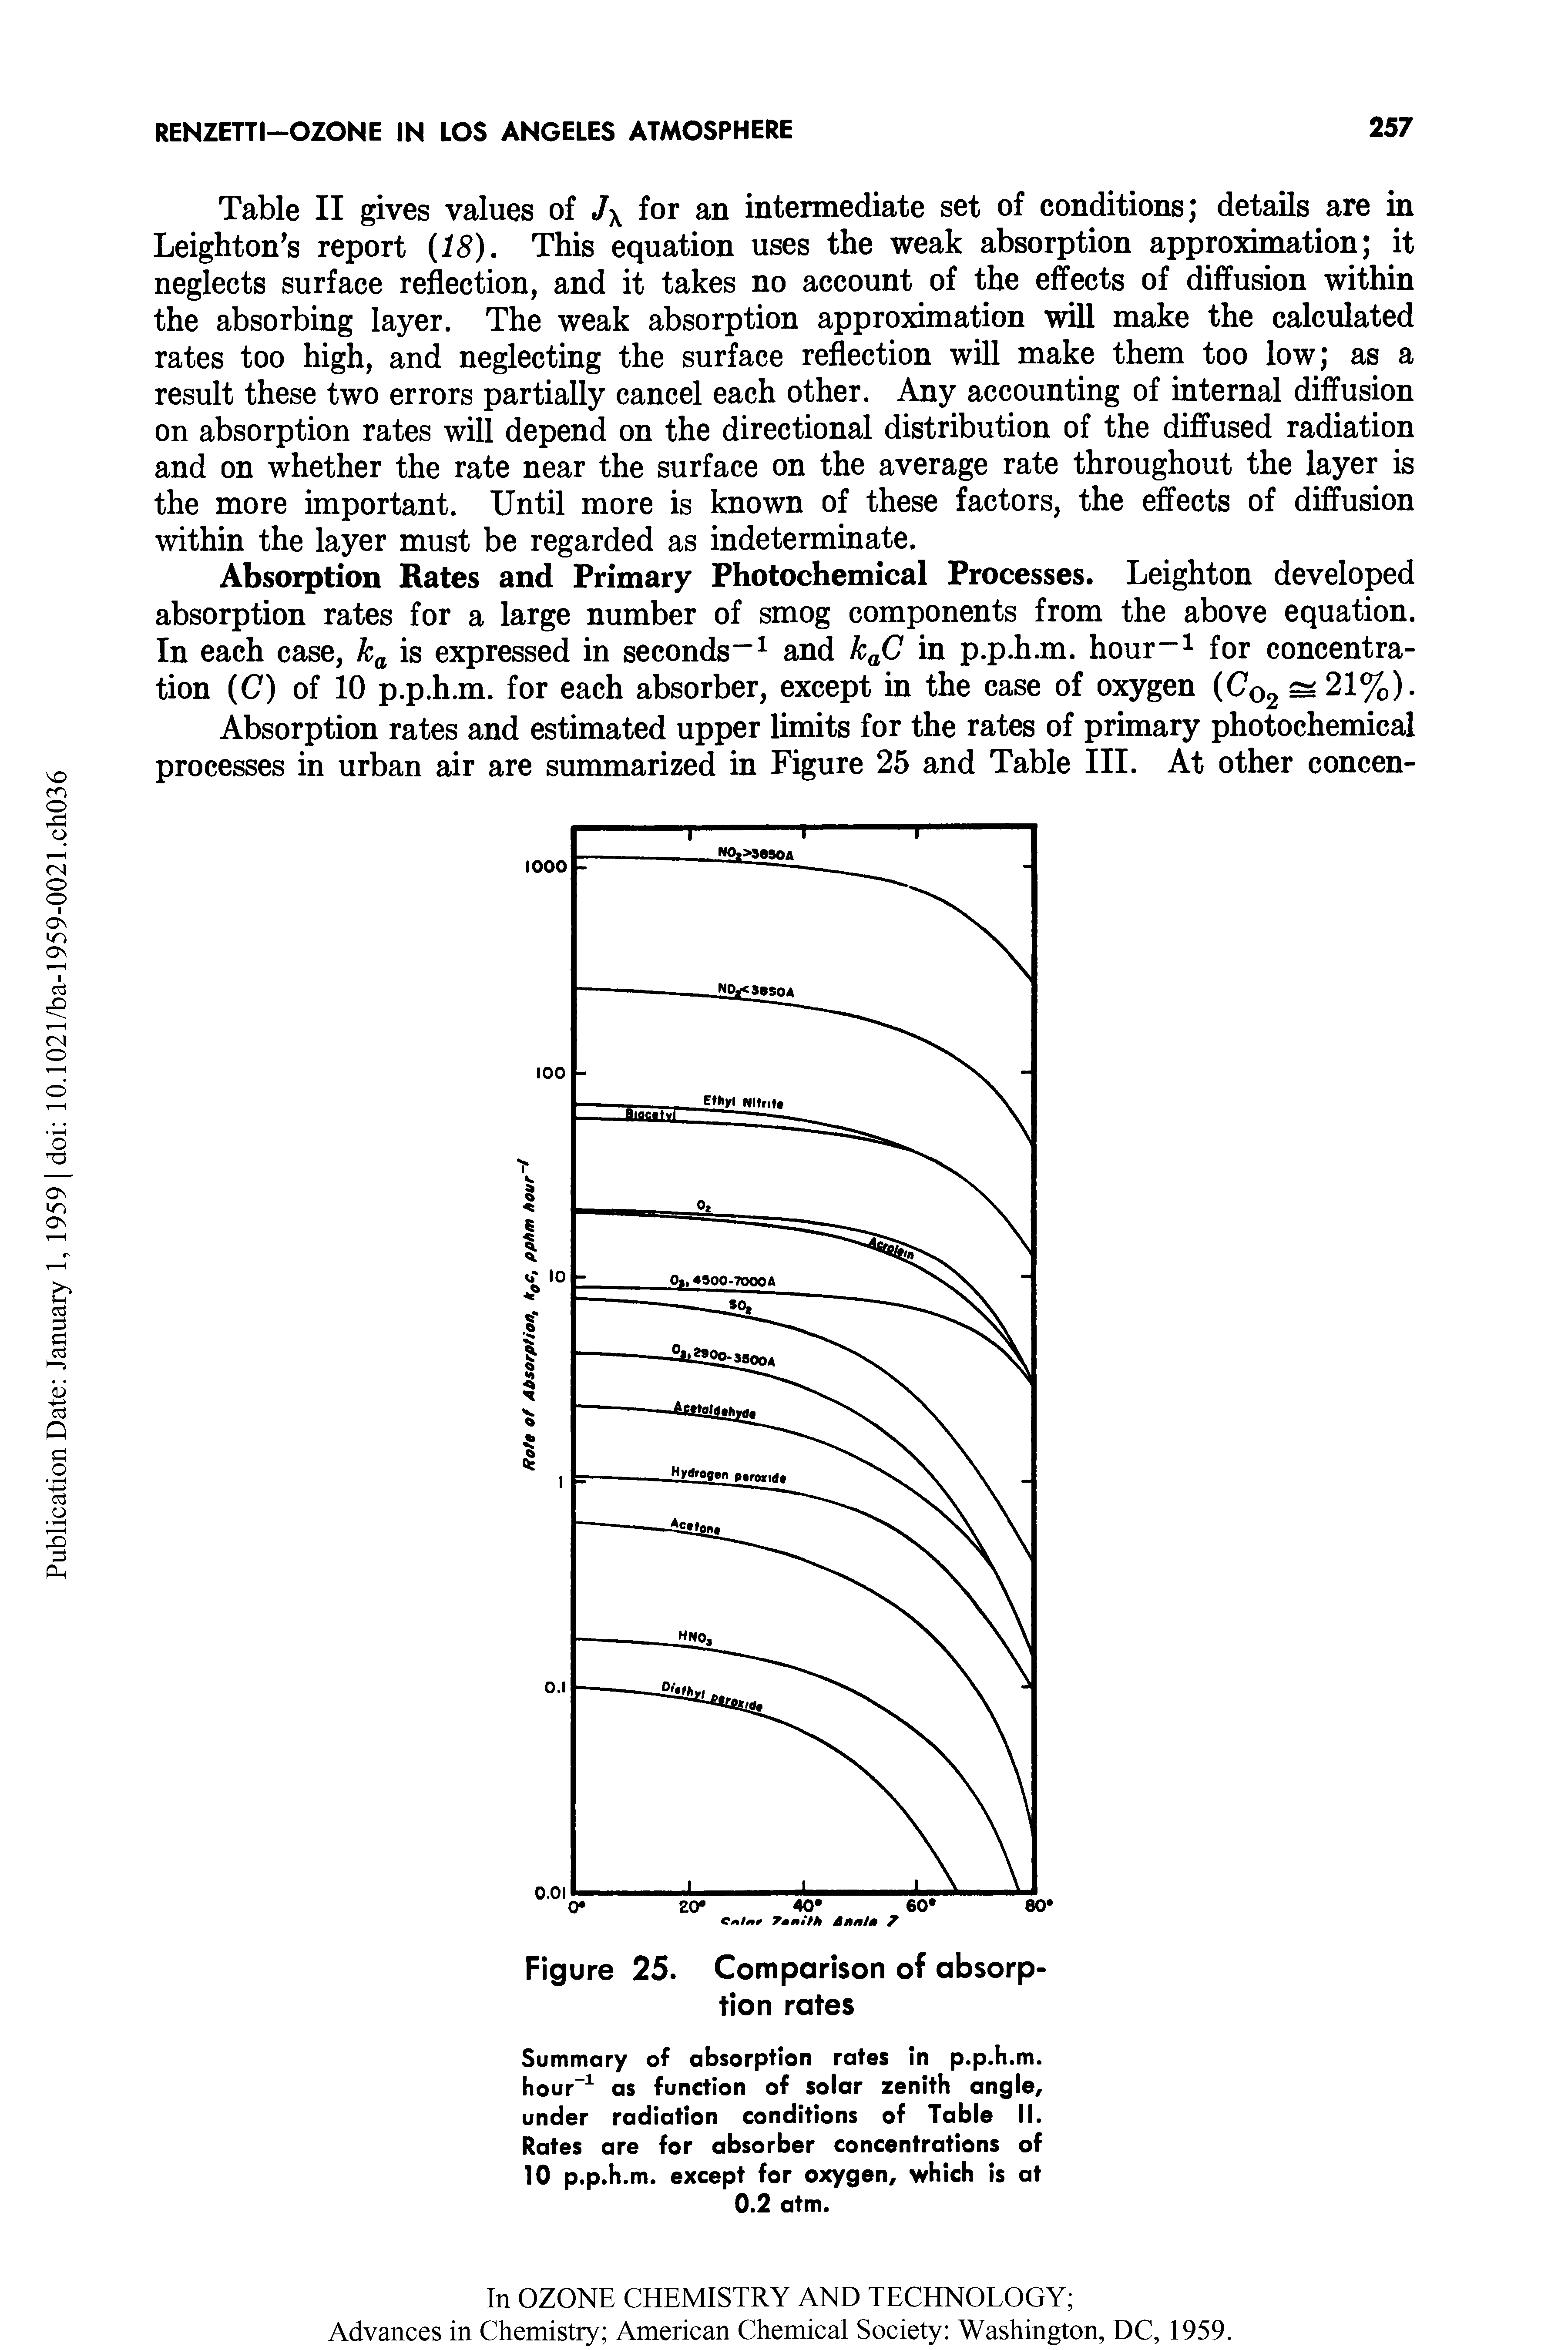 Table II gives values of Jx for an intermediate set of conditions details are in Leighton s report (18). This equation uses the weak absorption approximation it neglects surface reflection, and it takes no account of the effects of diffusion within the absorbing layer. The weak absorption approximation will make the calculated rates too high, and neglecting the surface reflection will make them too low as a result these two errors partially cancel each other. Any accounting of internal diffusion on absorption rates will depend on the directional distribution of the diffused radiation and on whether the rate near the surface on the average rate throughout the layer is the more important. Until more is known of these factors, the effects of diffusion within the layer must be regarded as indeterminate.